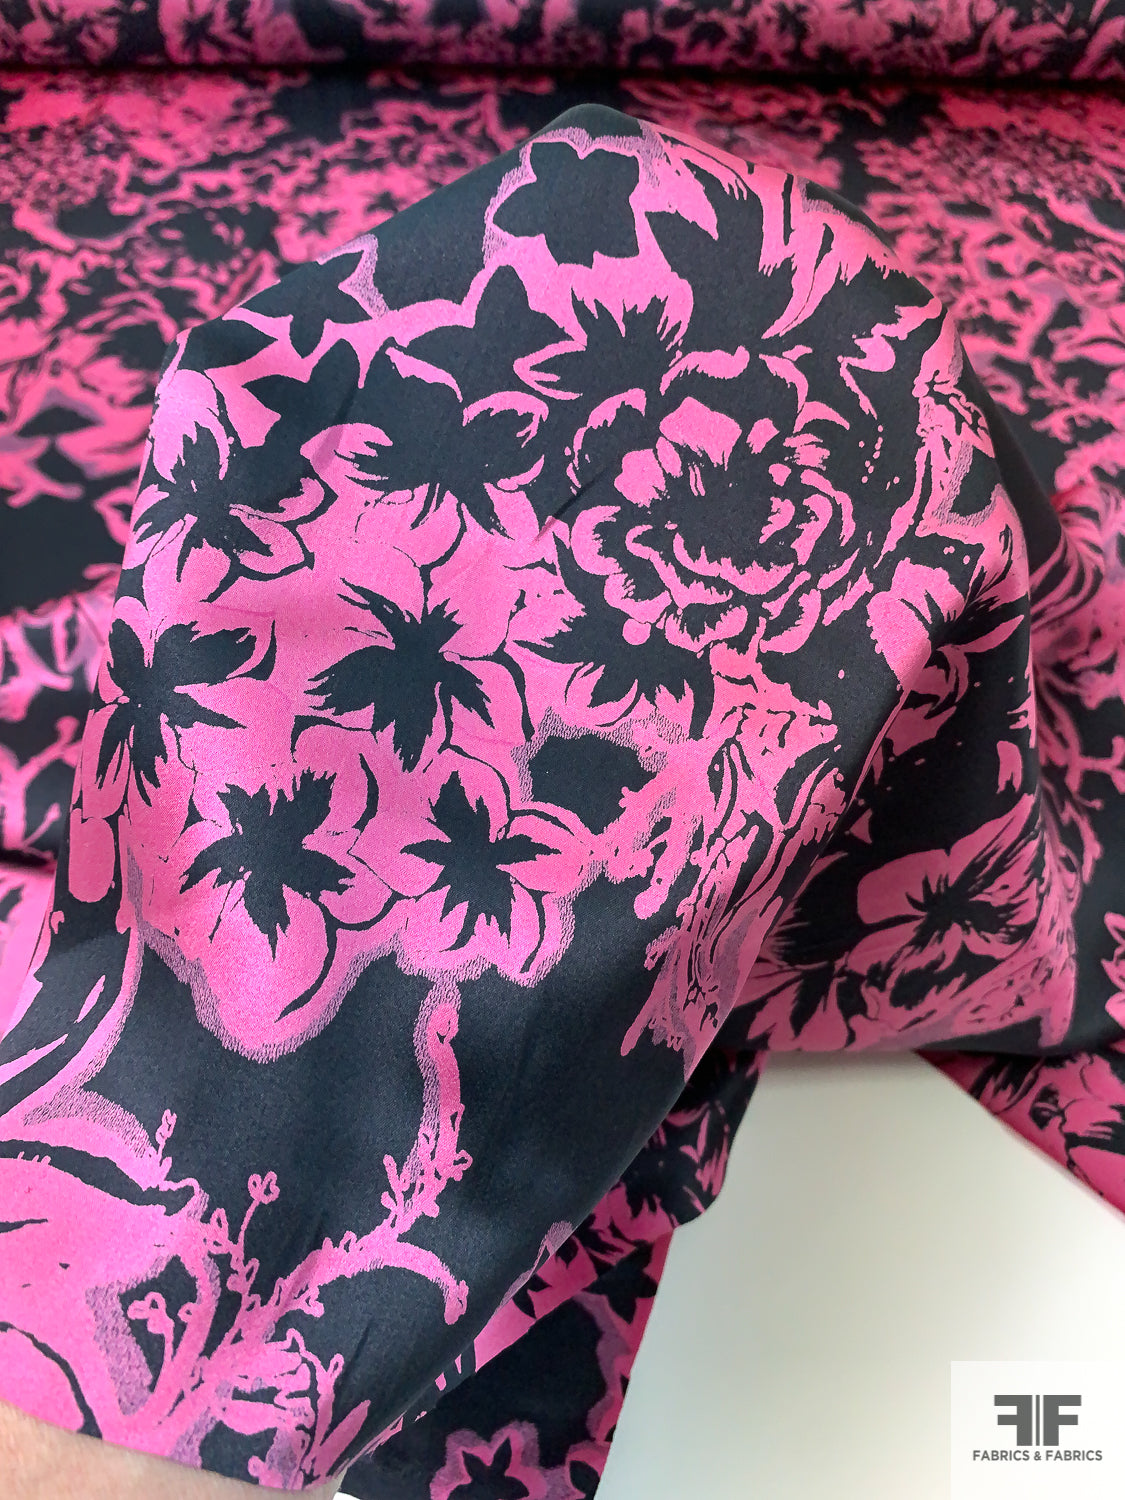 Romantic Floral Silhouette Printed Silk Charmeuse - Berry Pink / Black